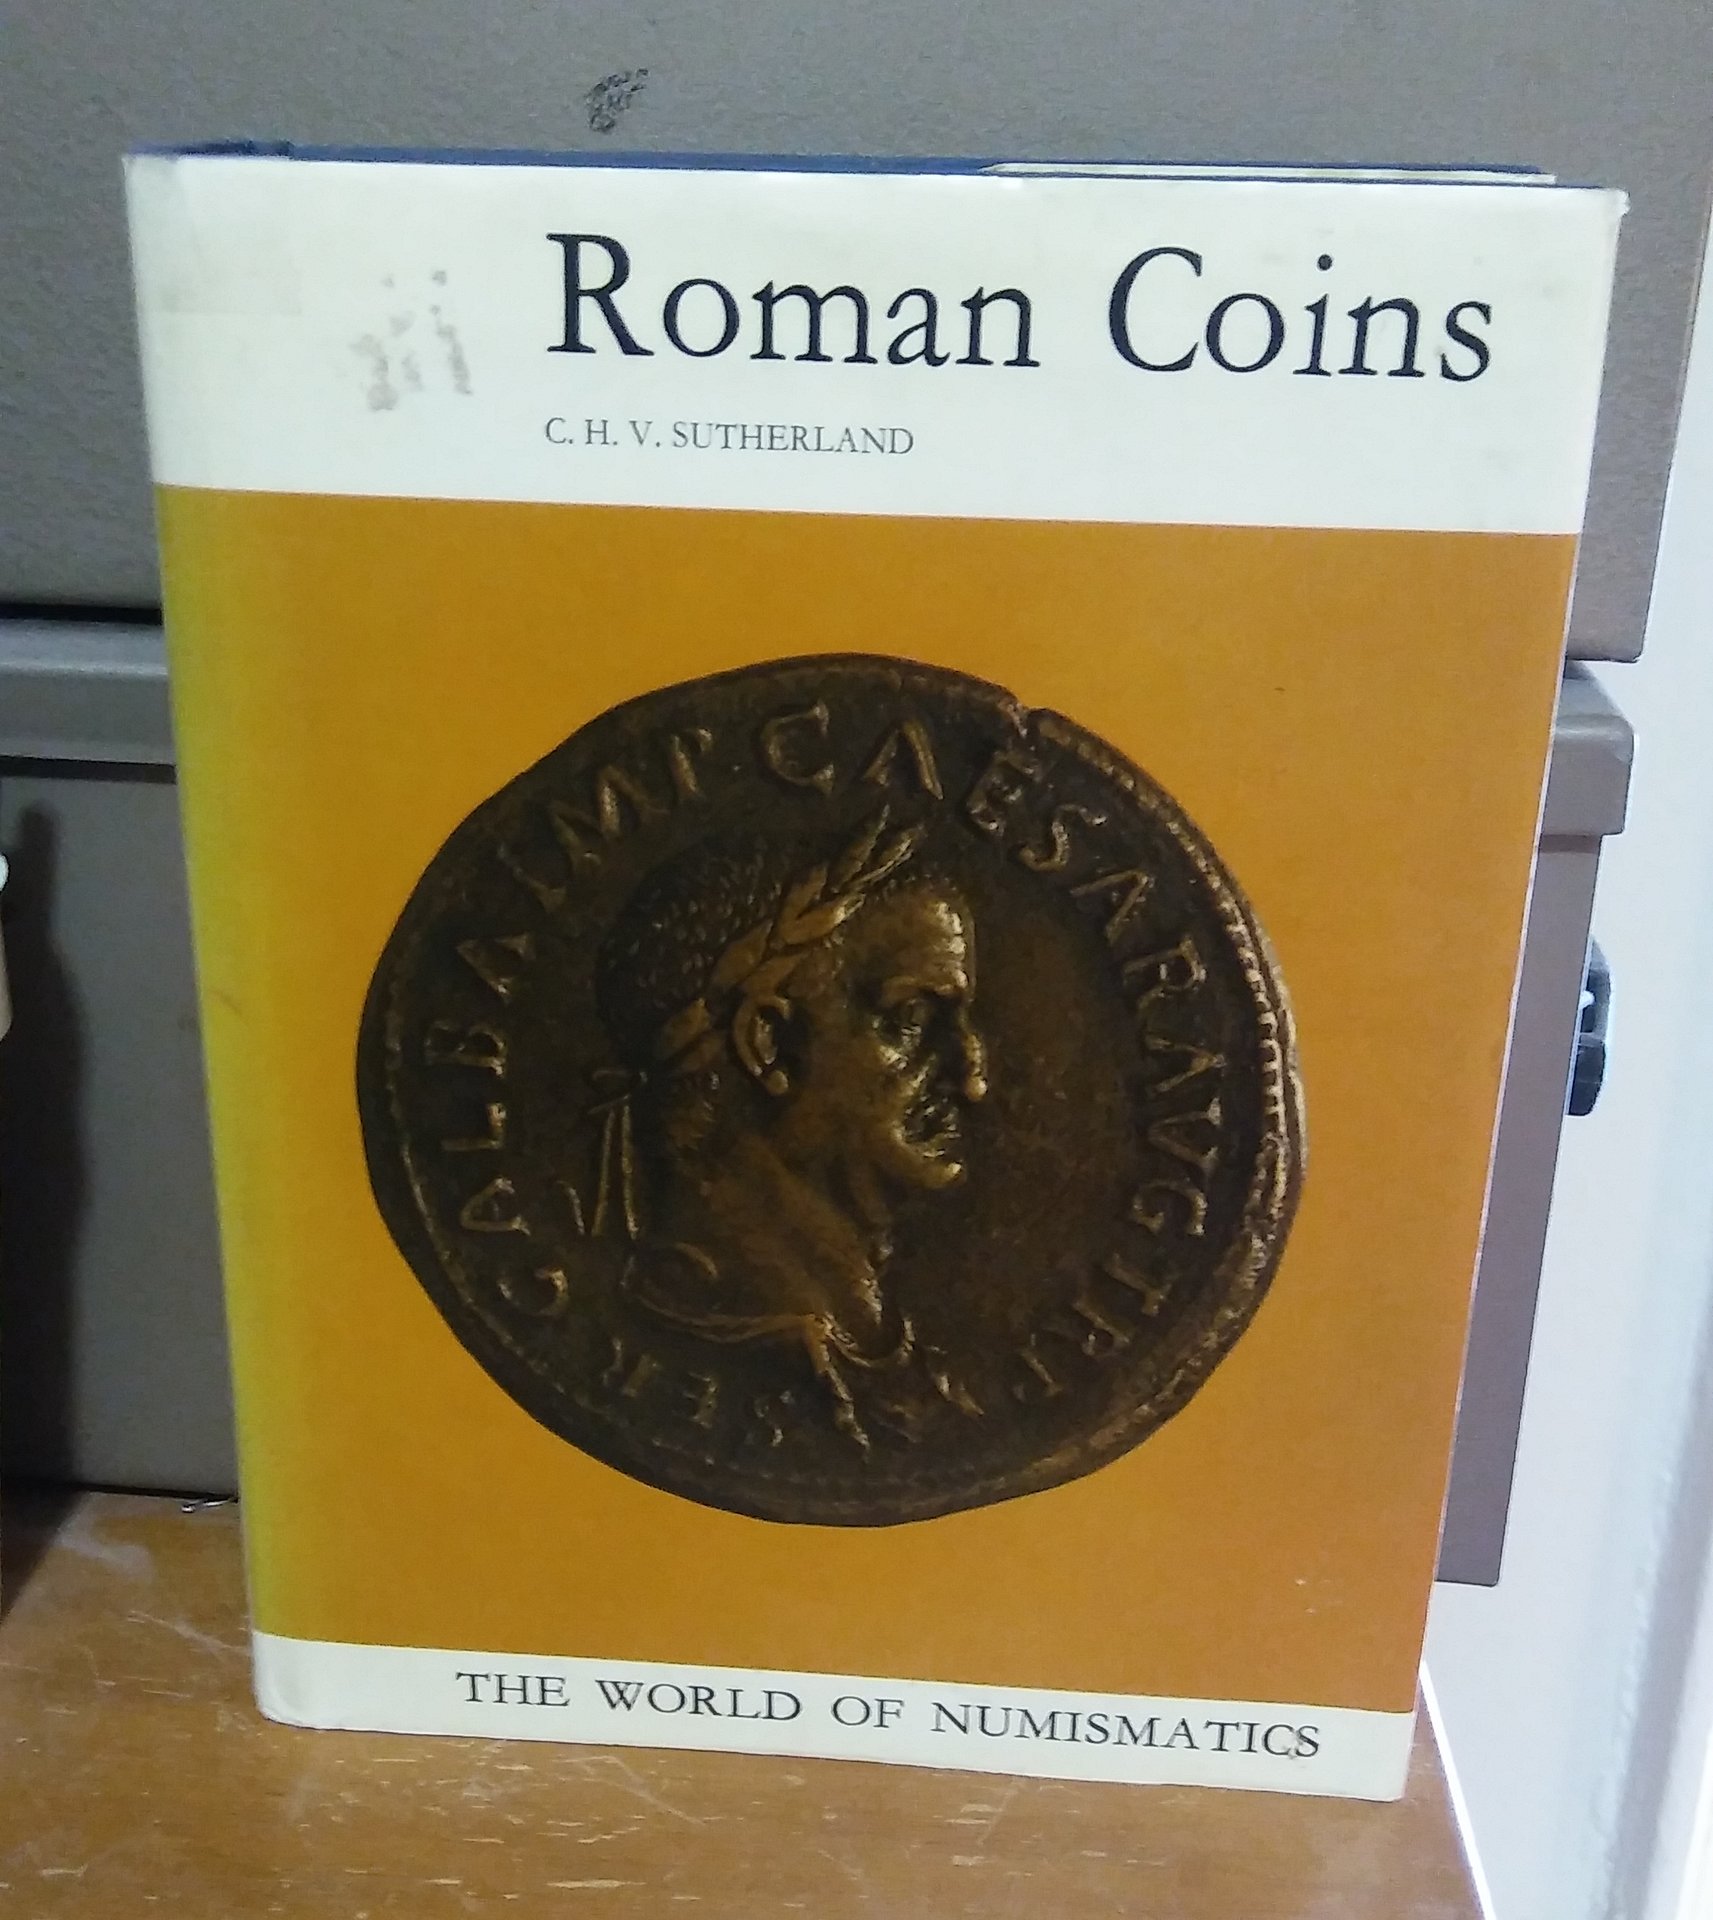 Sutherland Roman Coins book, photo of cover.jpg